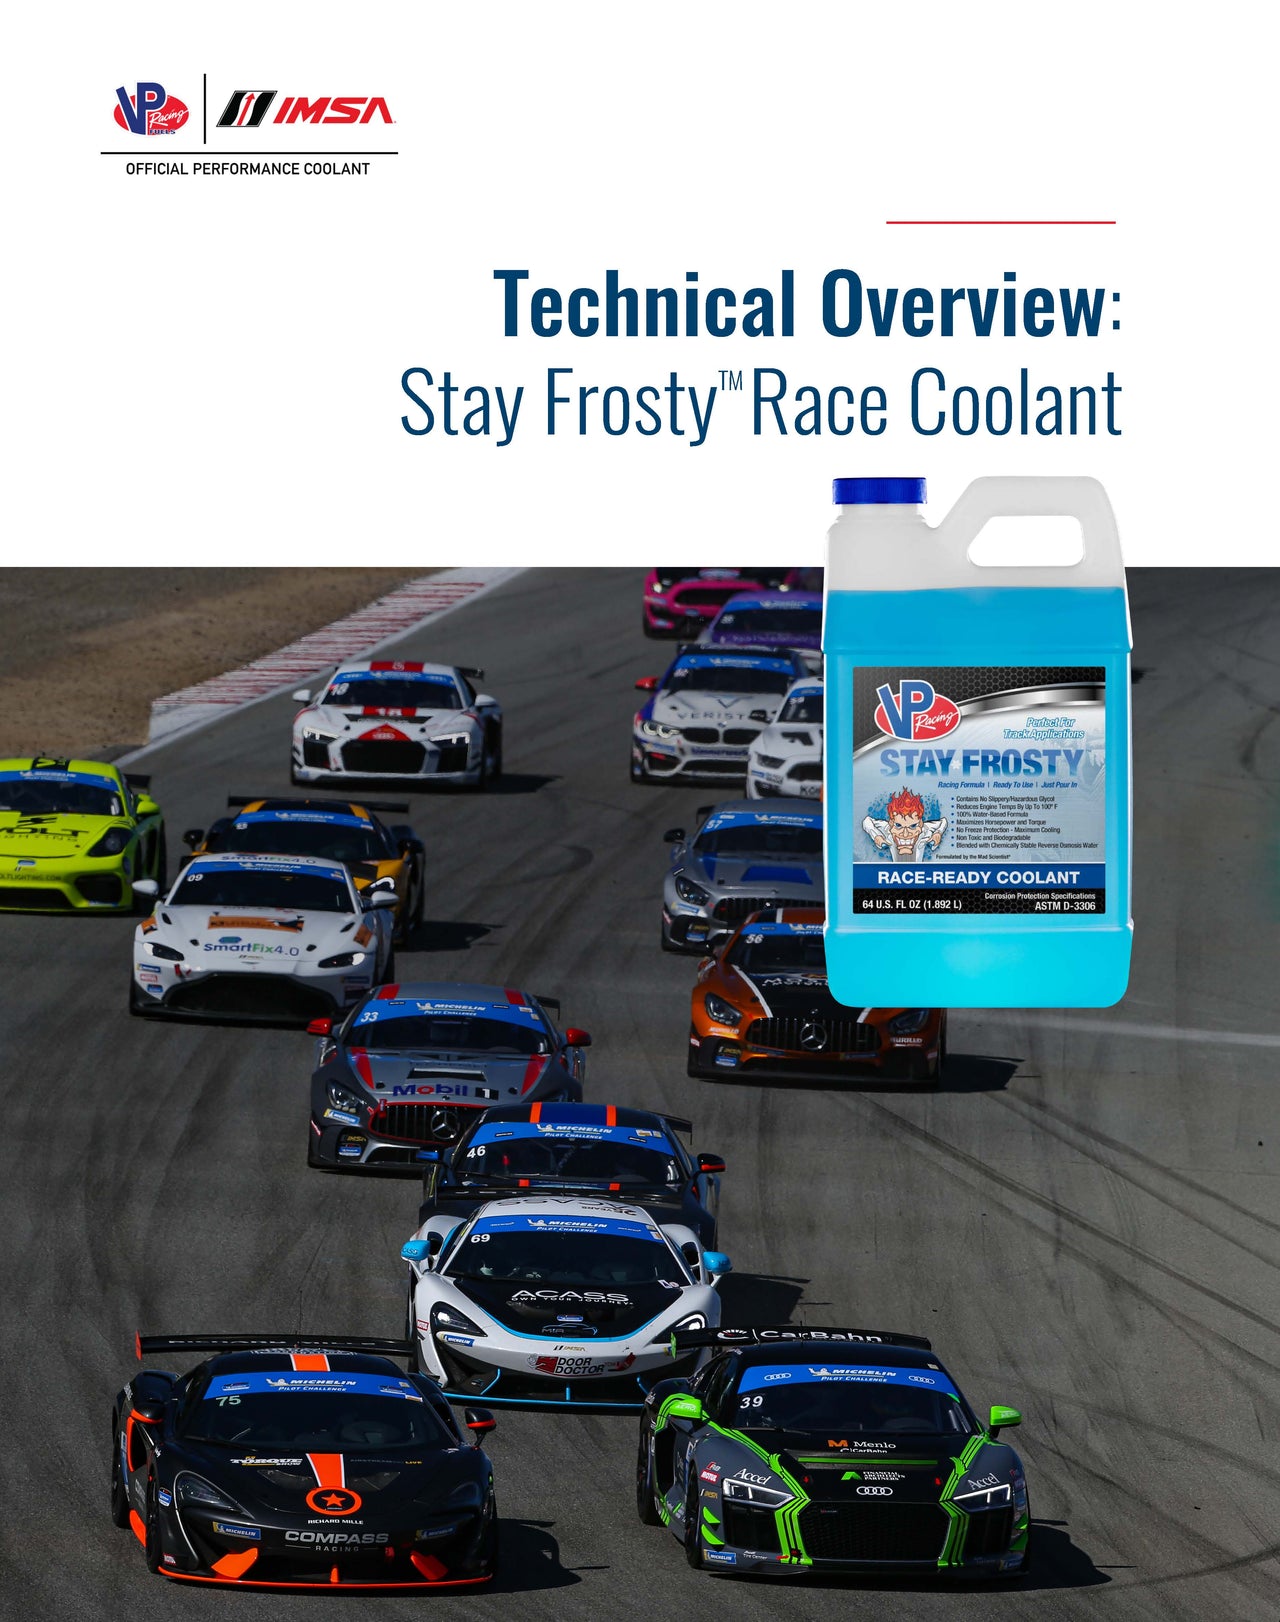 TECH OVERVIEW: STAY FROSTY RACE COOLANT